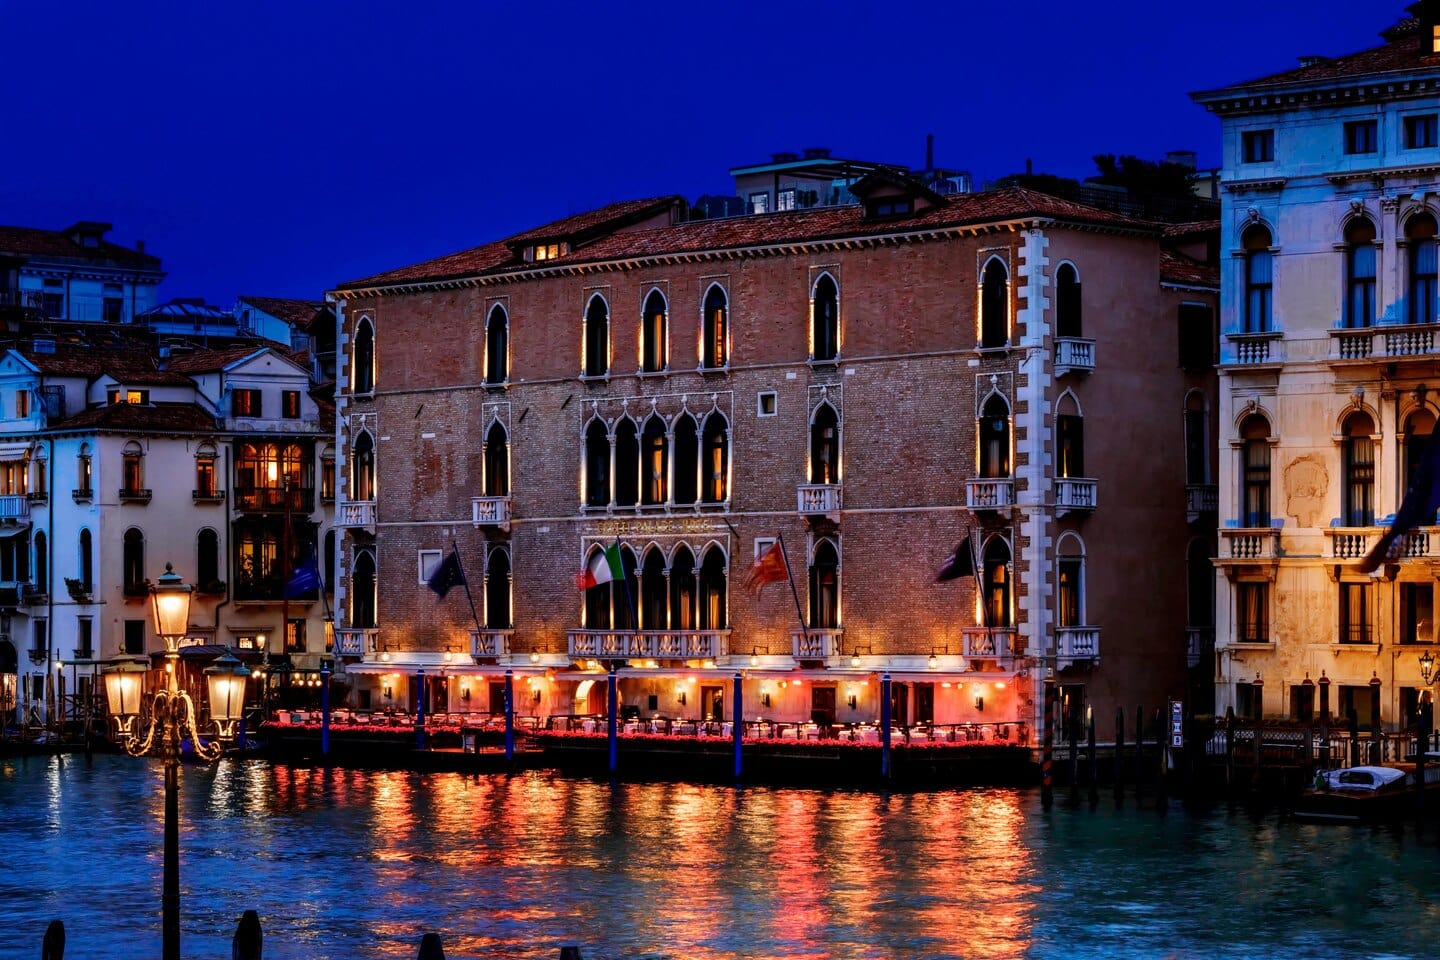 Starwood Hotels and Resorts - Gritti Palace in Venice